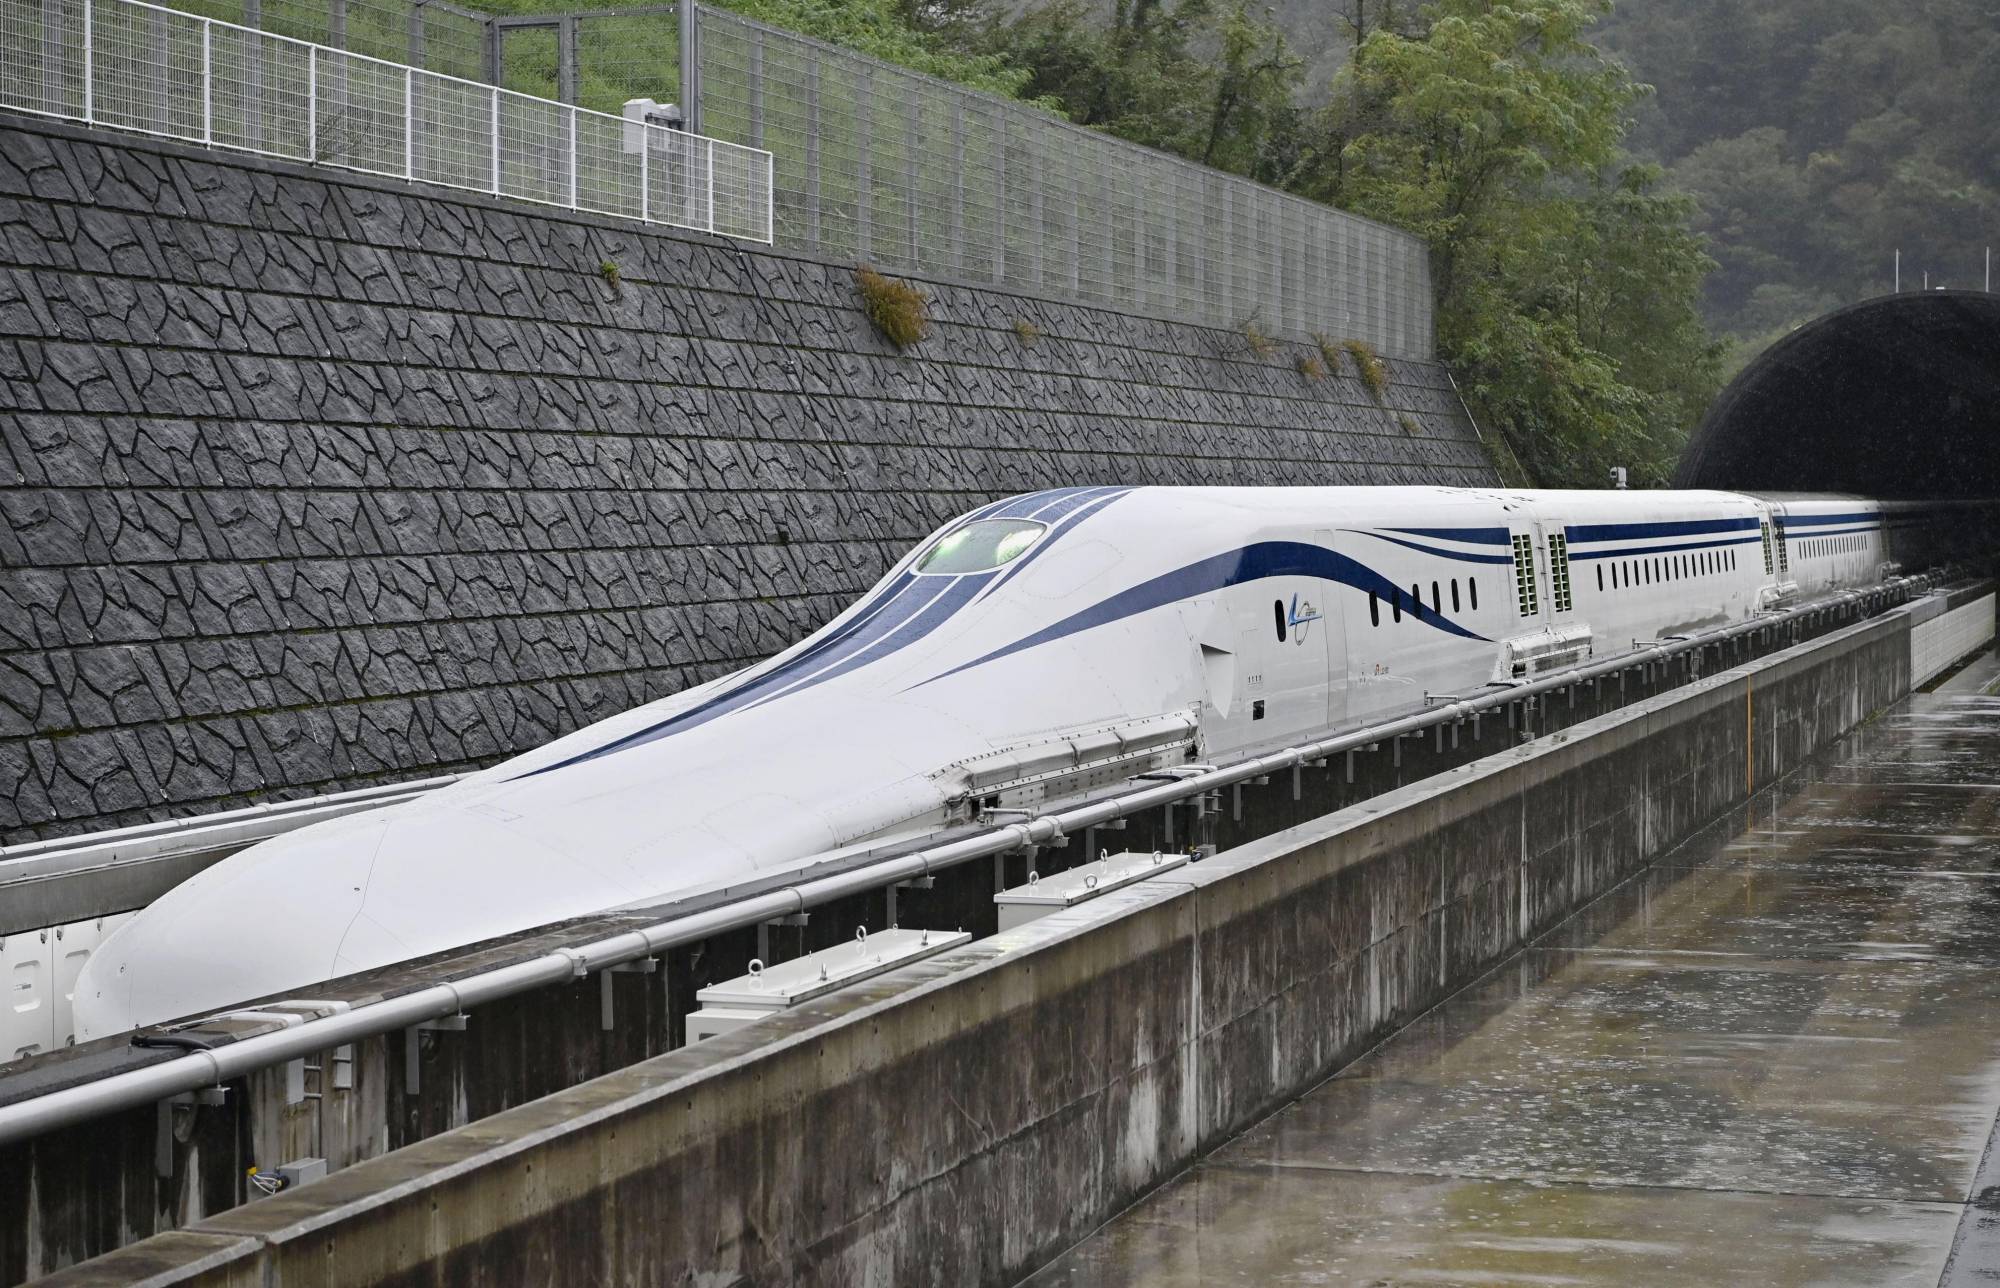 The Linear Chuo Shinkansen, Central Japan Railway's maglev bullet train, was shown to the media in October 2020. The firm has offered to provide its superconducting maglev technology free of charge to a project in the U.S. | KYODO